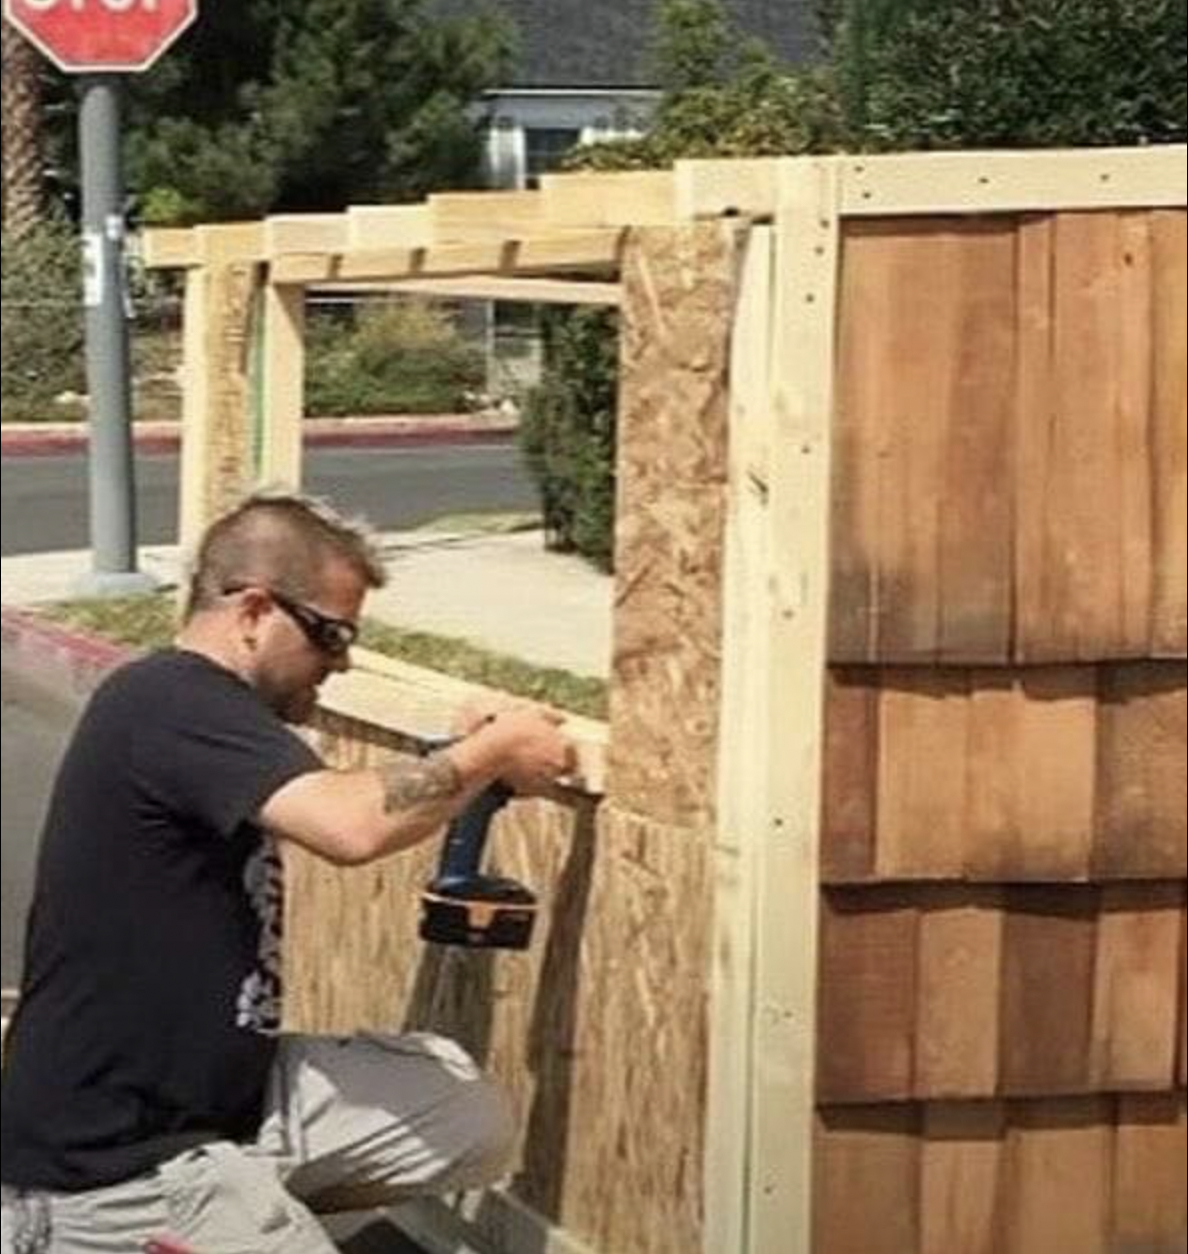 Man notices a homeless woman sleeping on the streets, decides to build a tiny house for her